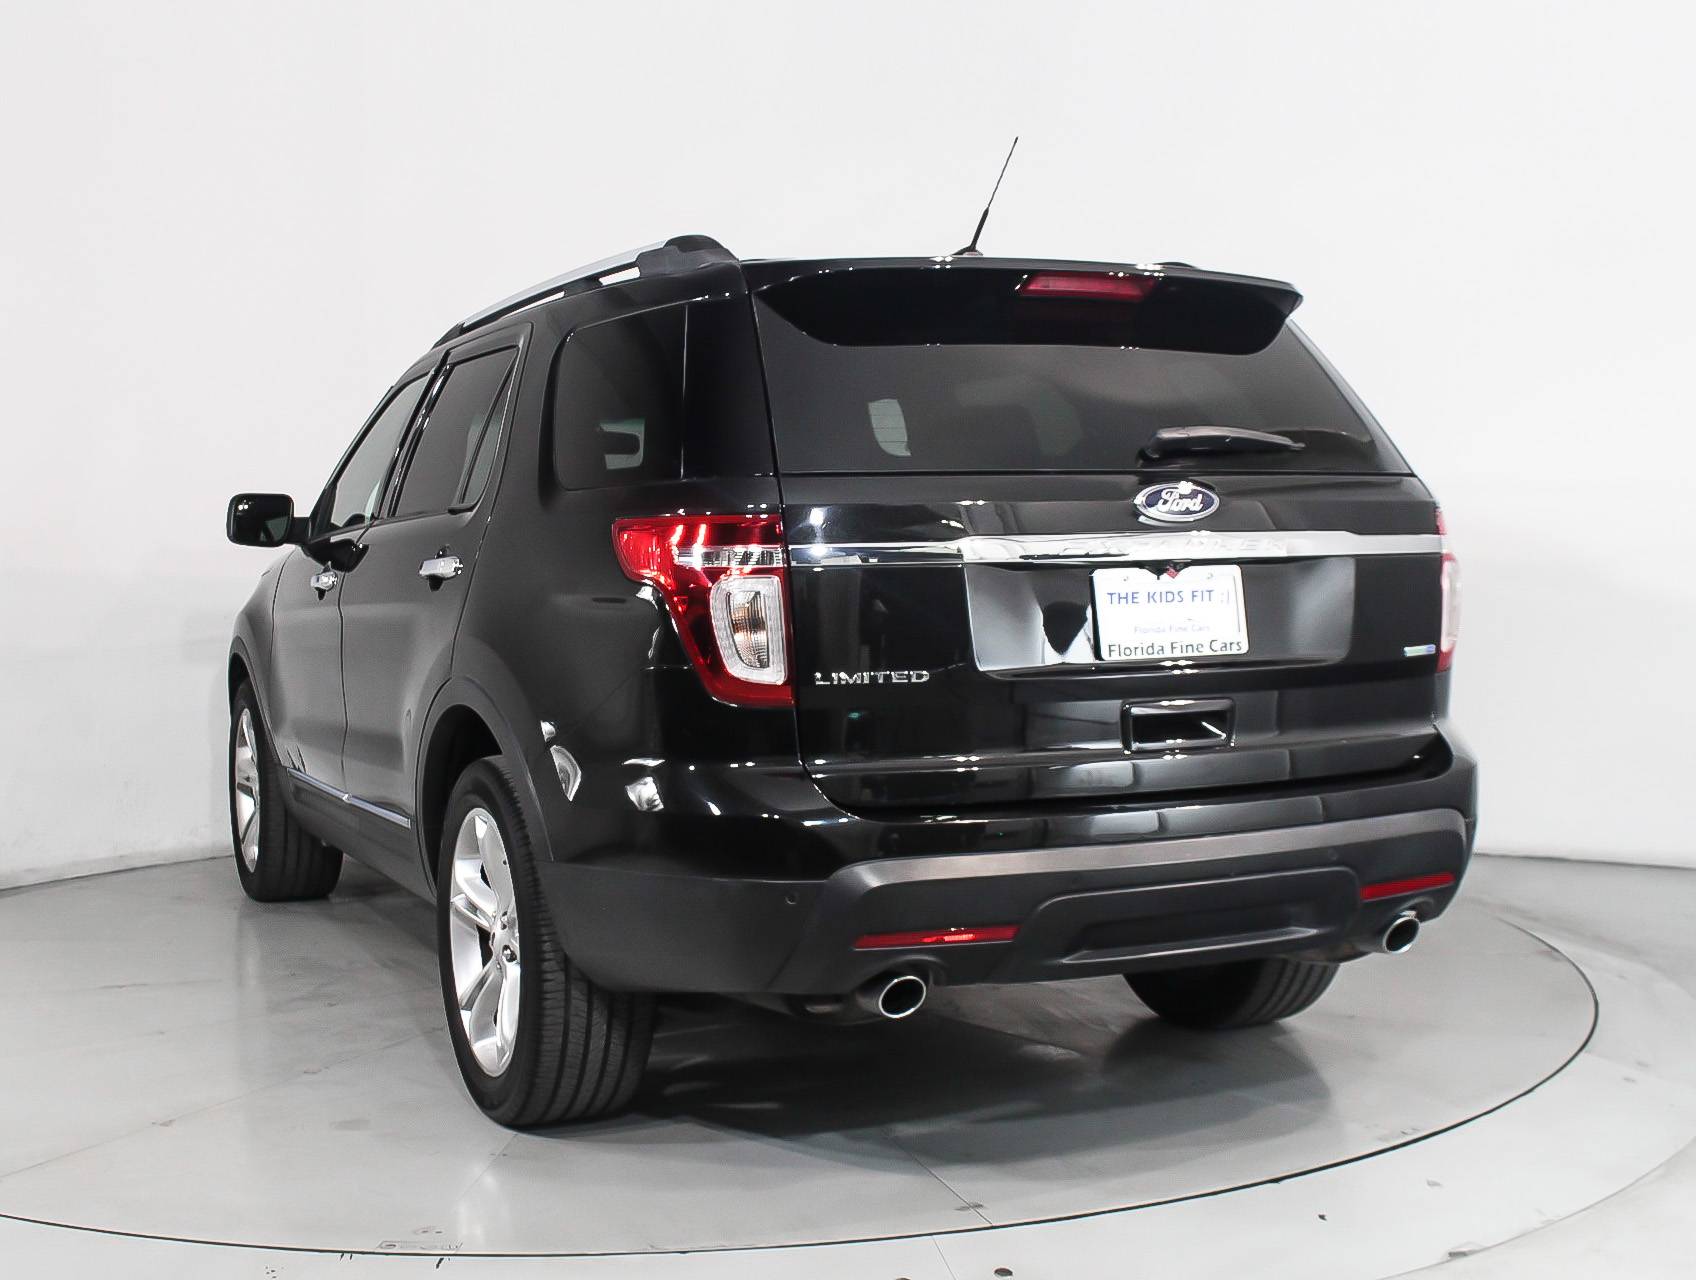 Florida Fine Cars - Used FORD EXPLORER 2014 MARGATE Limited 4x4